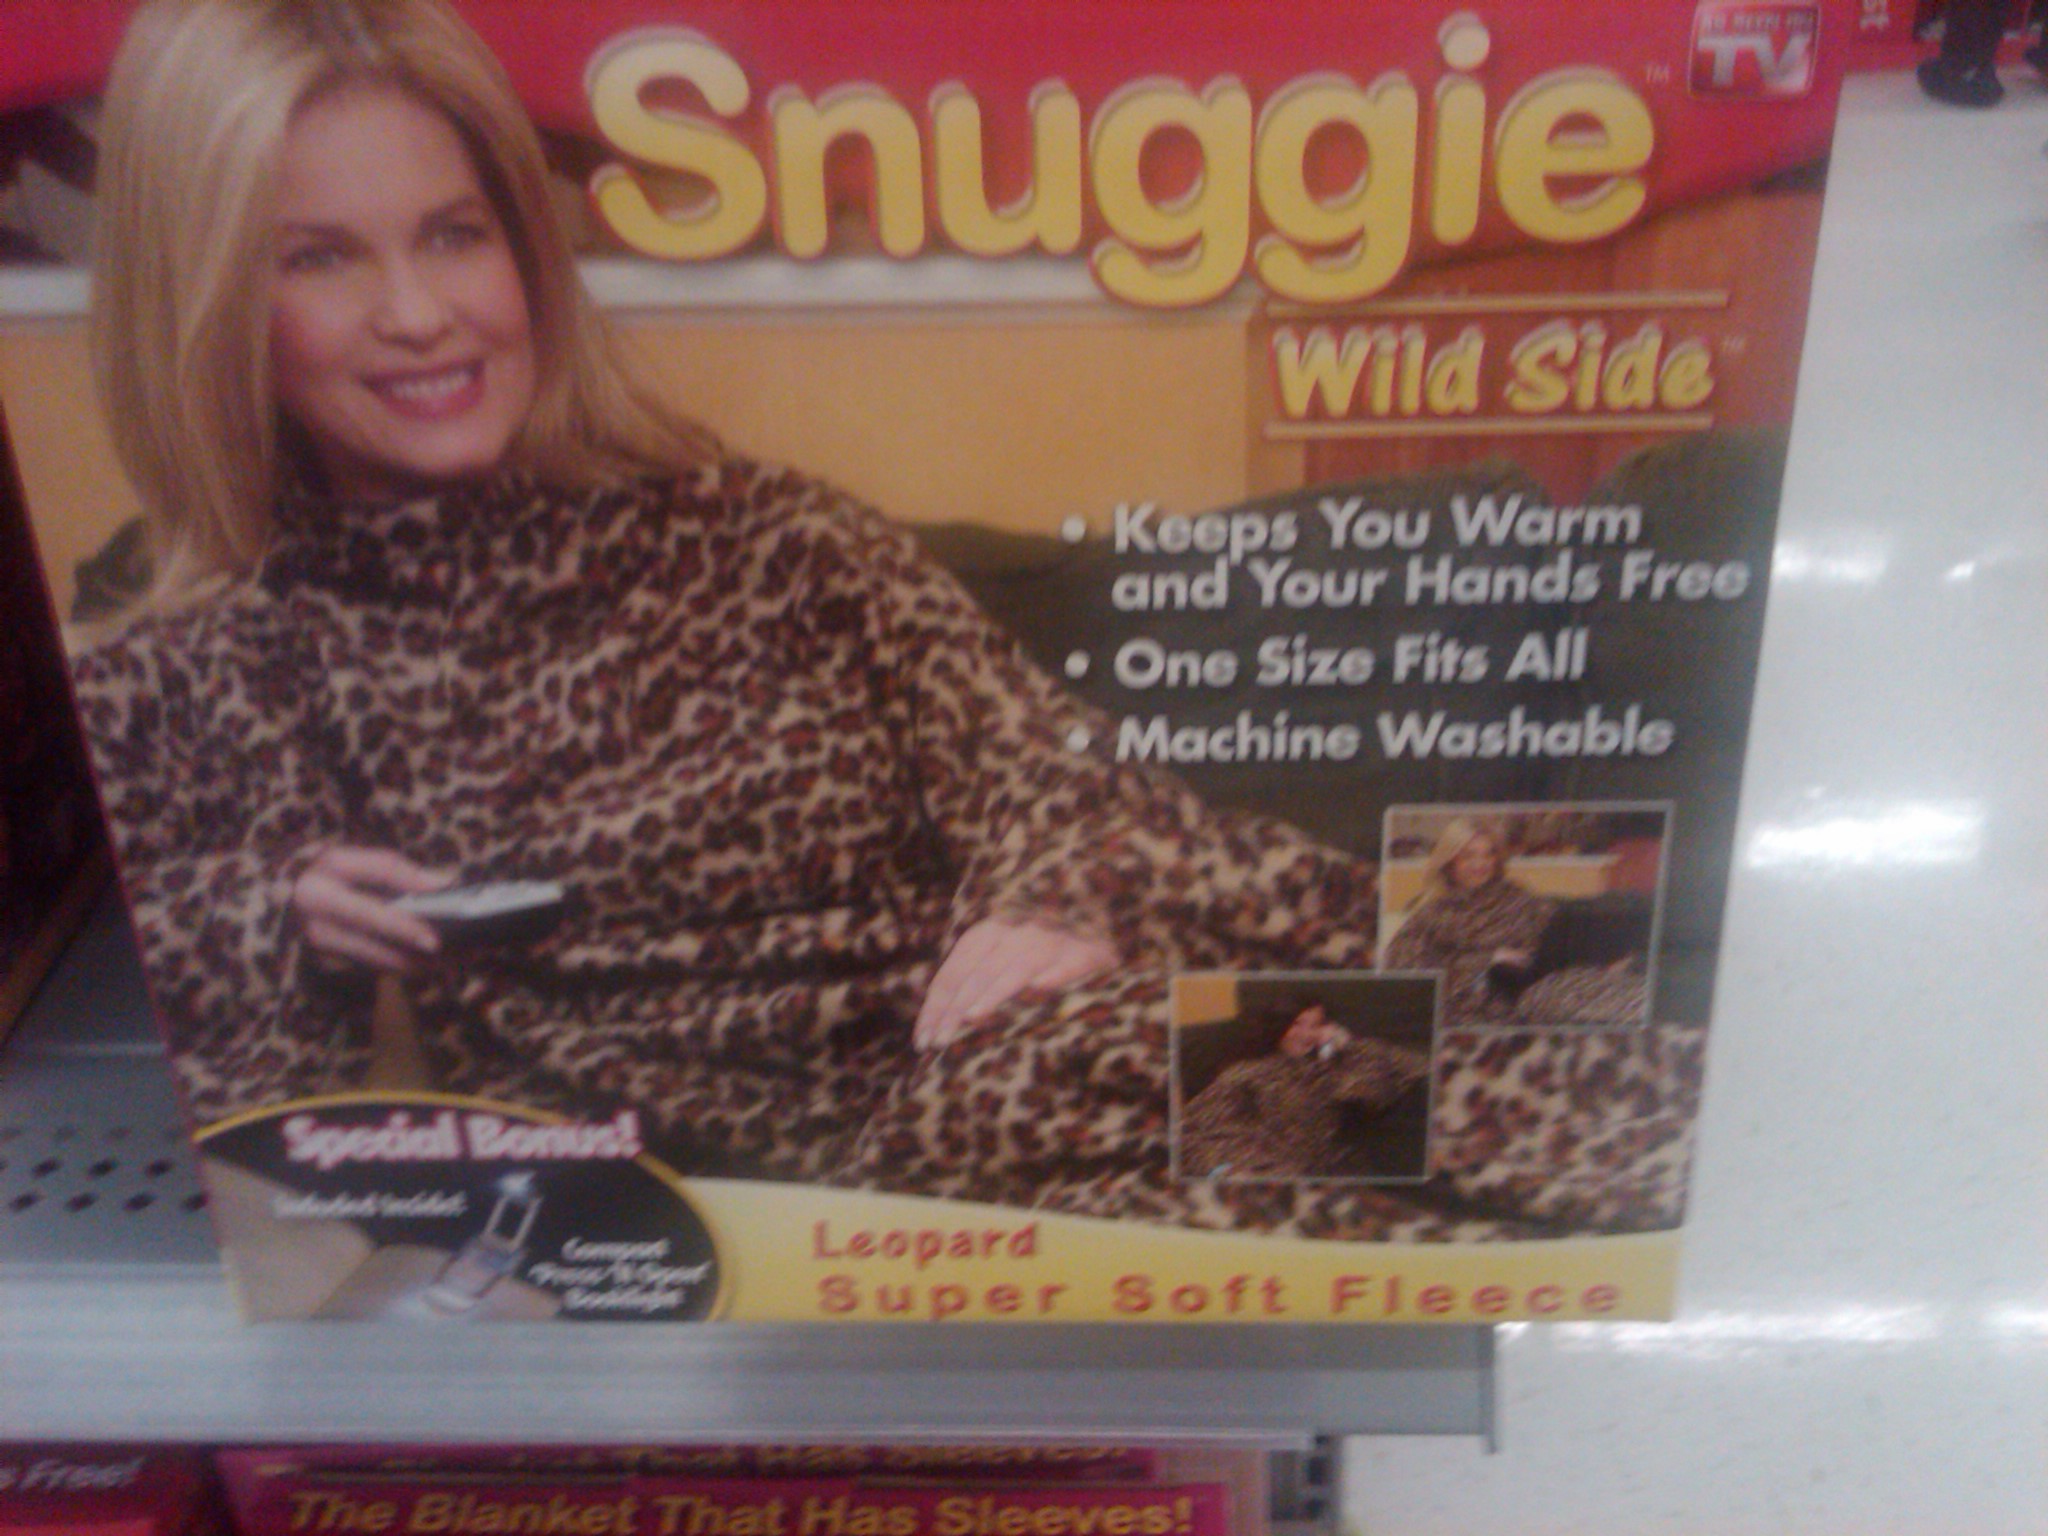 That is all we needed, a leopard snuggie, watch out victoria secret!!!  WTF!!!